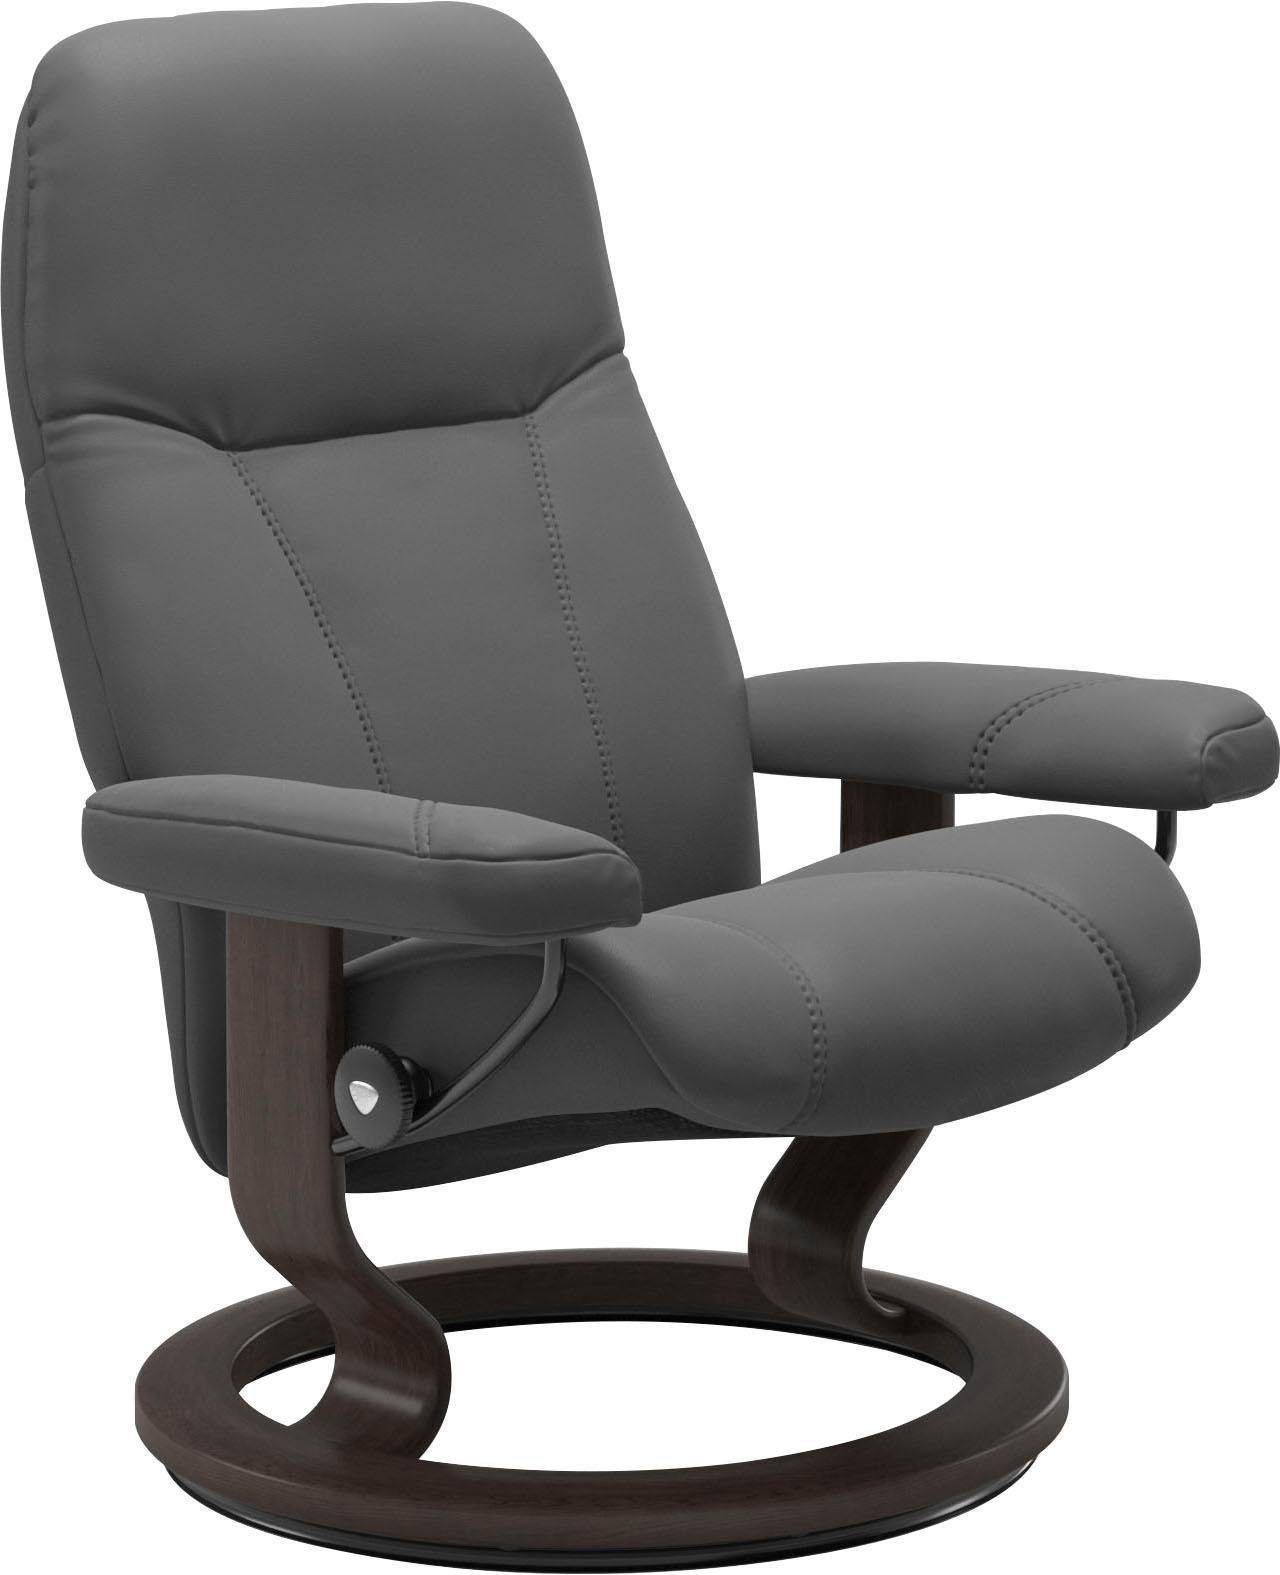 Gestell Classic mit L, Consul, Größe Stressless® Base, Wenge Relaxsessel